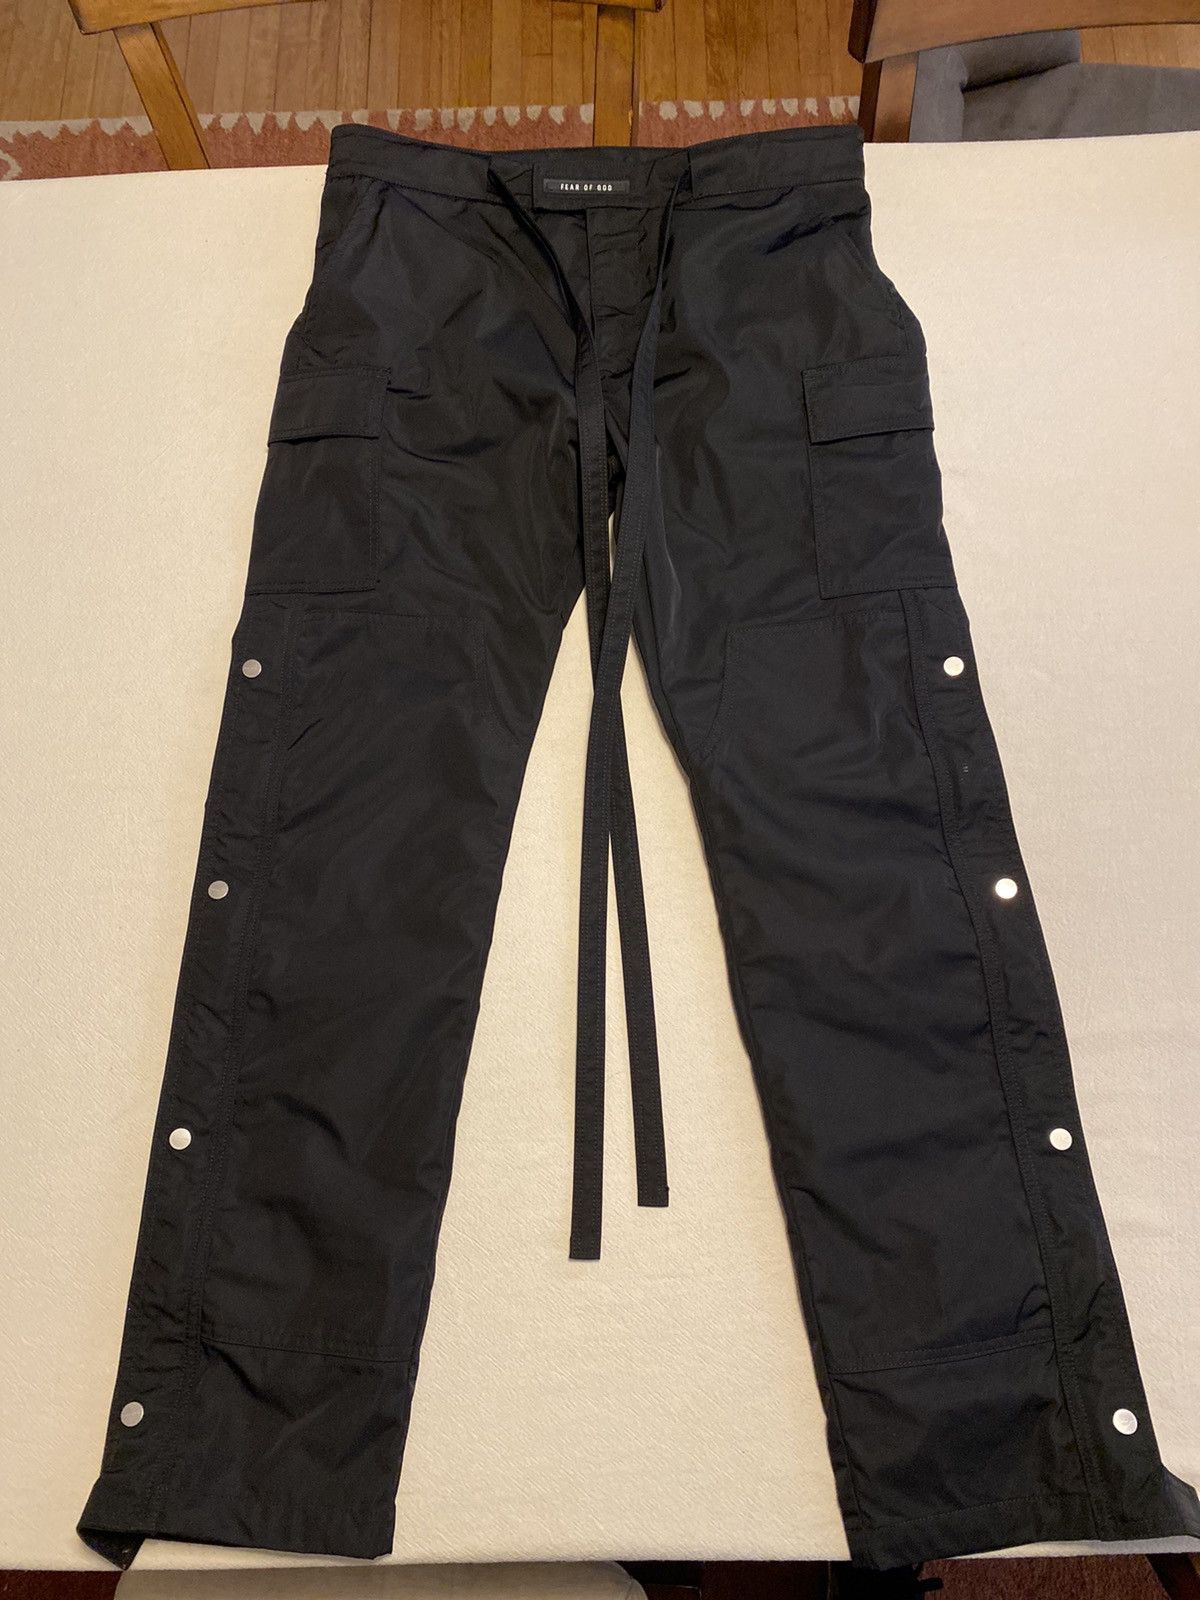 Fear of God Sixth Collection Nylon Cargo Pants | Grailed